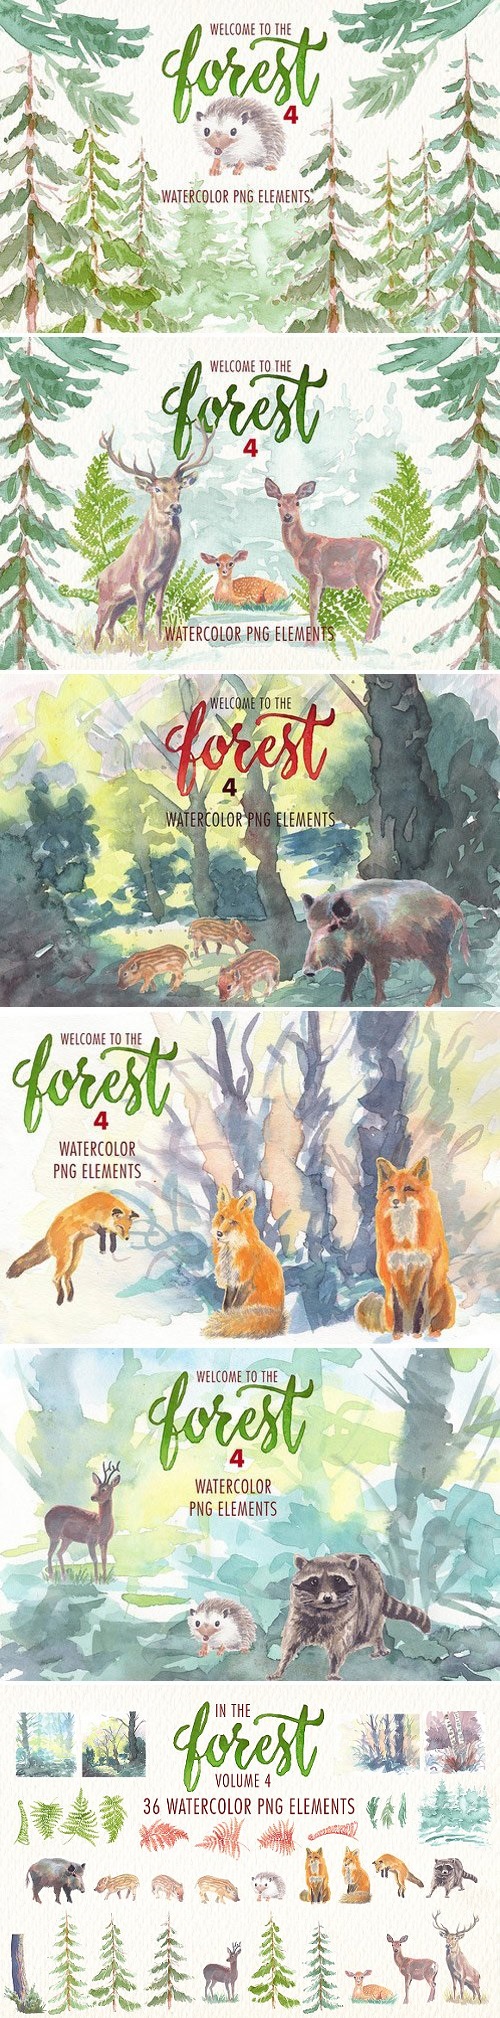 watercolor in the forest clipart 1926459